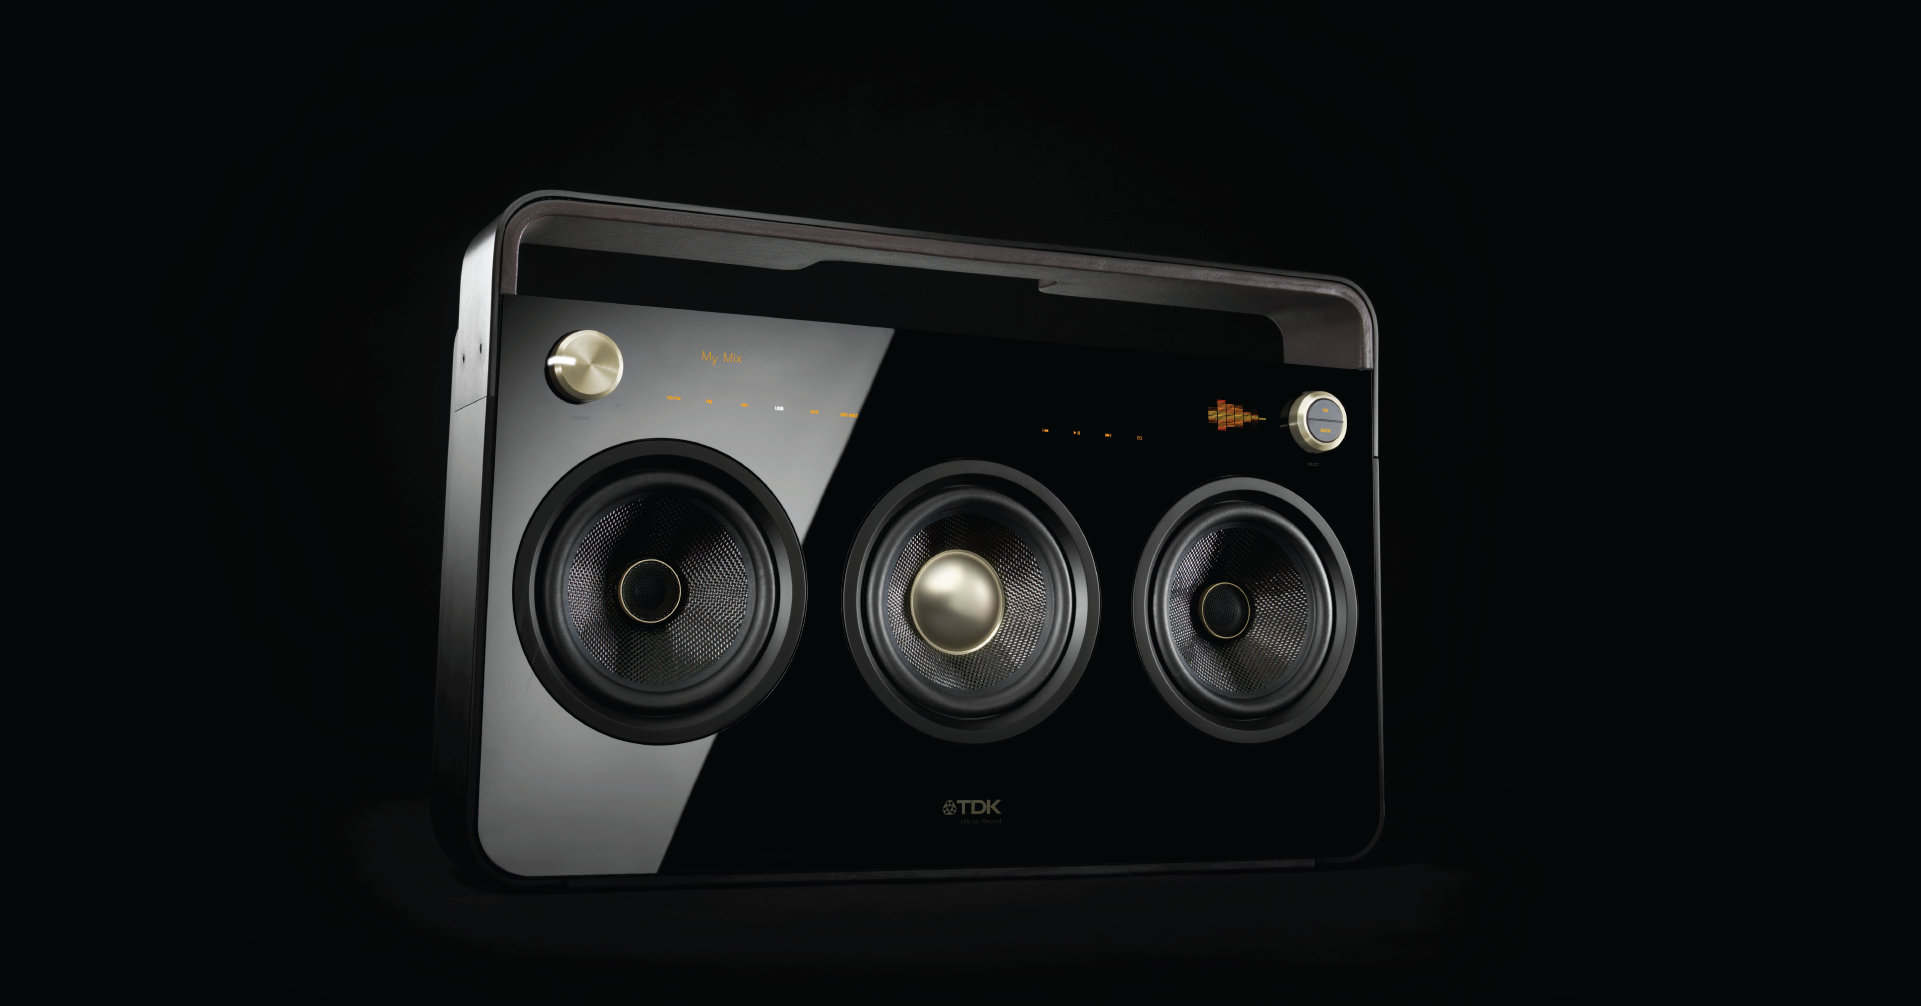 Black boombox with gold knobs, a digital interface with orange lettering, three speakers, and a solid plastic black handle on top